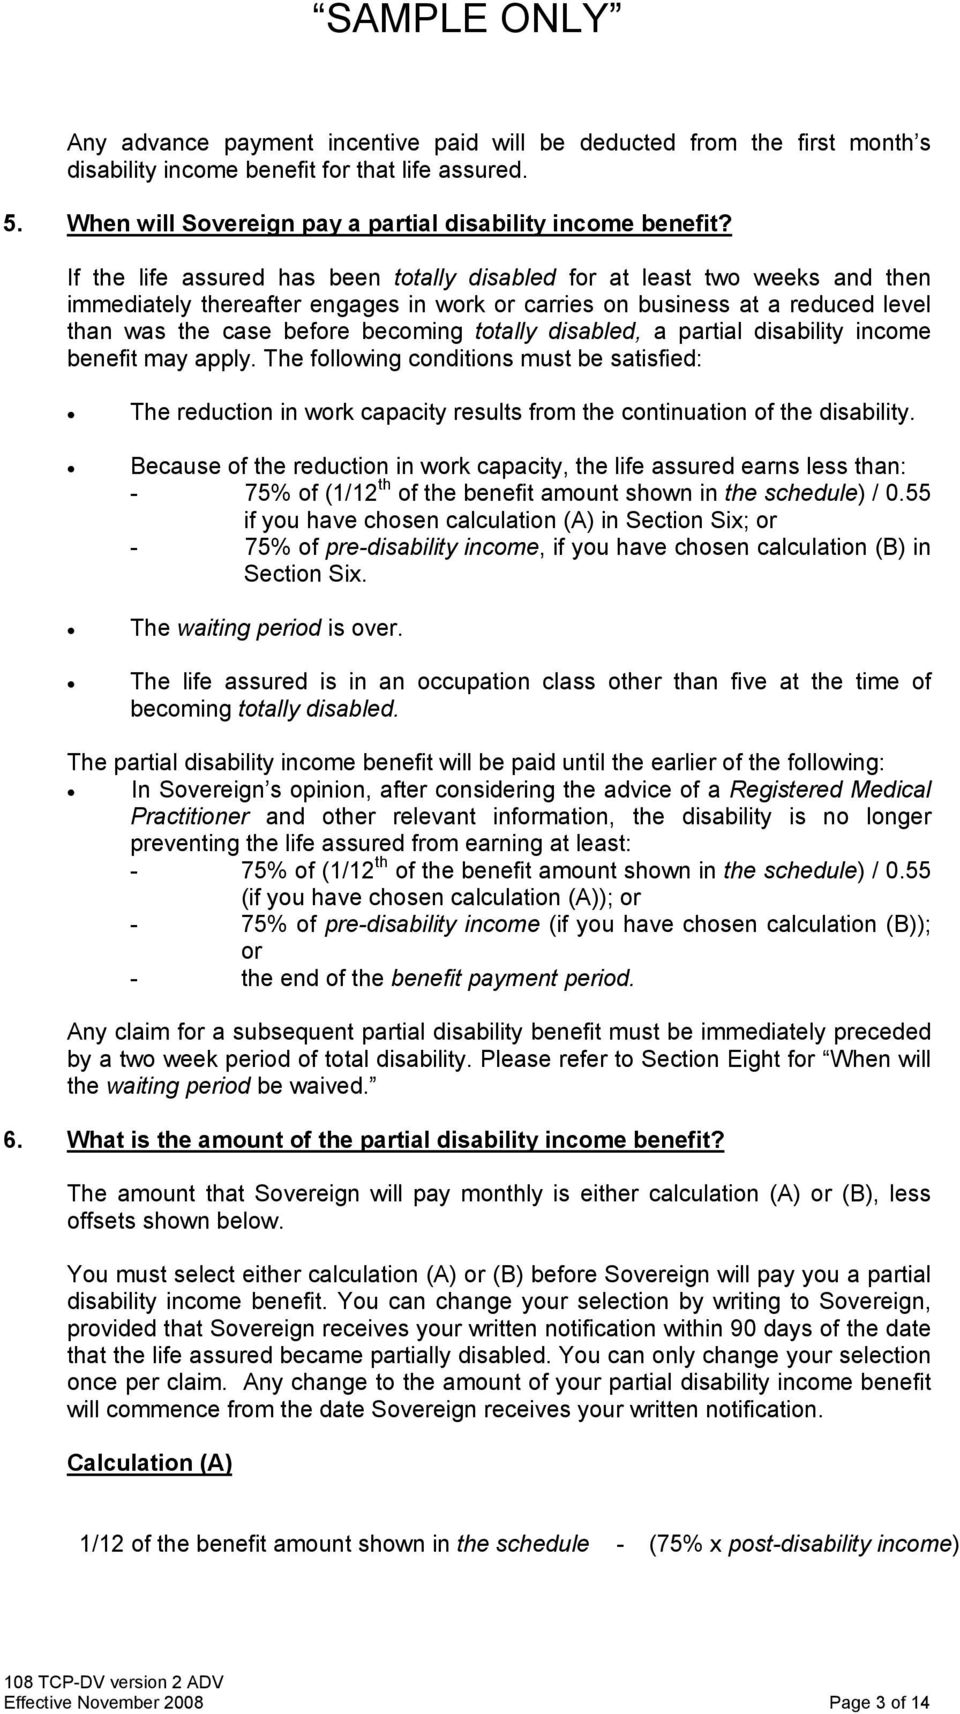 totally disabled, a partial disability income benefit may apply. The following conditions must be satisfied: The reduction in work capacity results from the continuation of the disability.